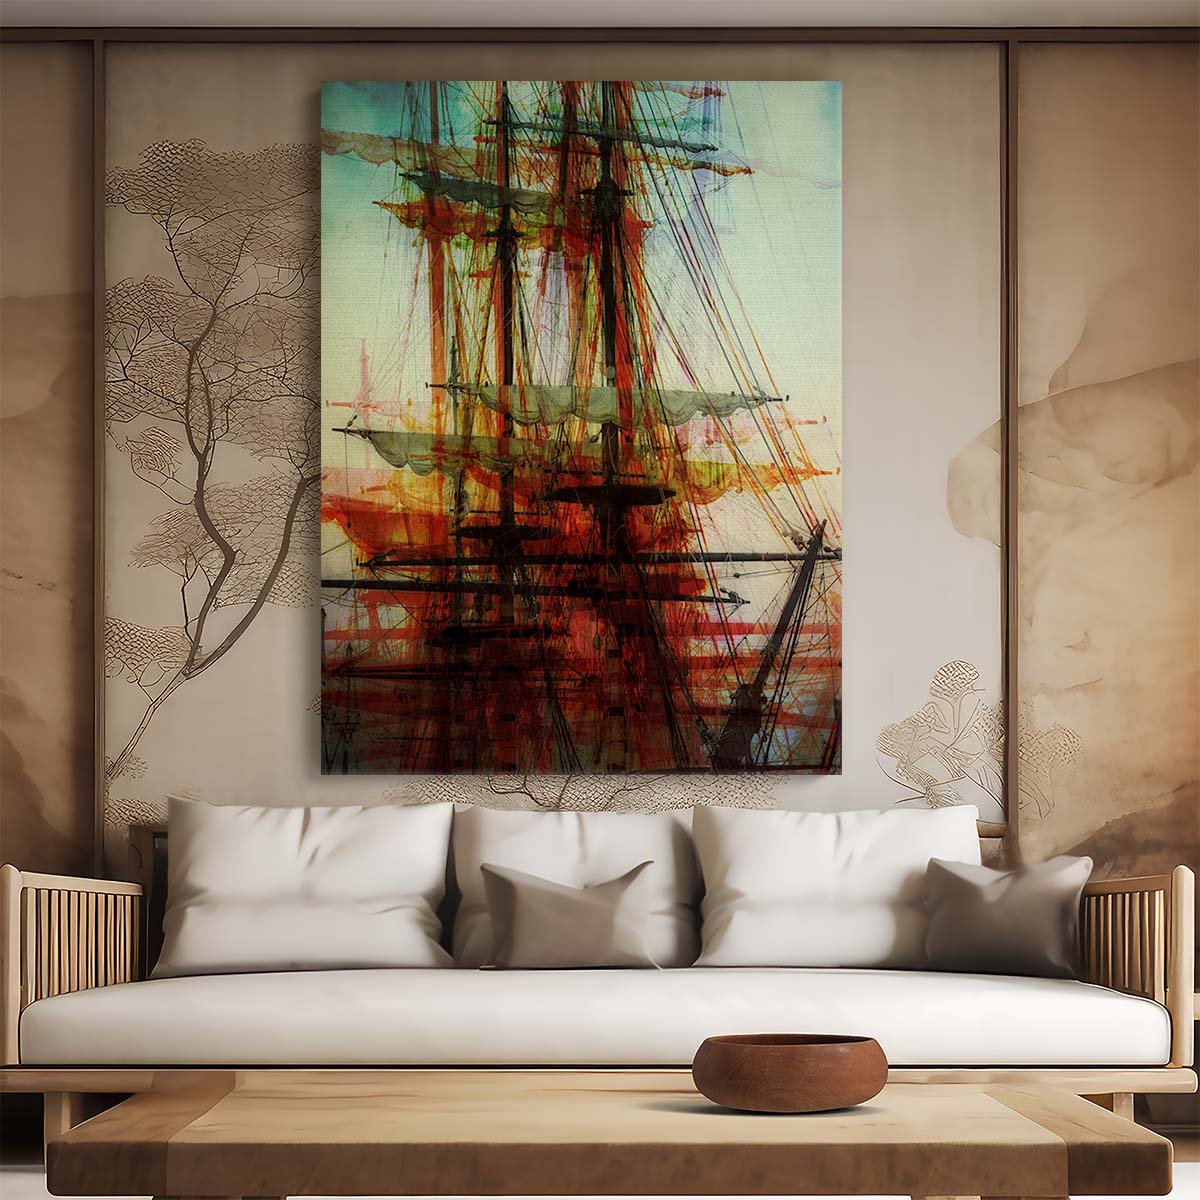 Vintage Nautical Photography Art - Abstract Sailing Boat, California by Luxuriance Designs, made in USA